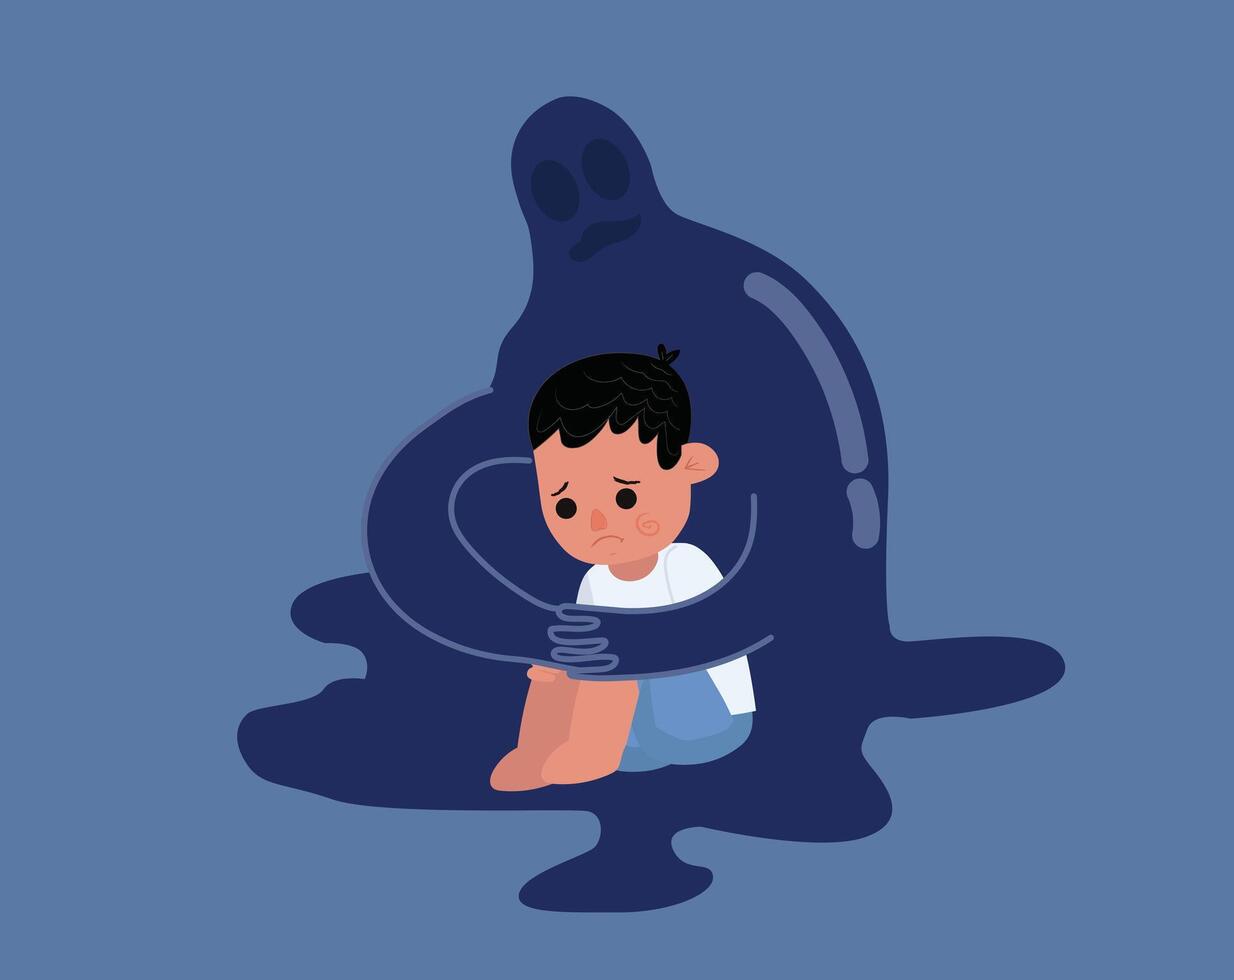 The little boy tripped in depression, the kid sitting in the flour sad, Insecurity, and bullying children. Sad boy. Flat design. Bullying and harassment of children. Abstract flat illustration. Vector